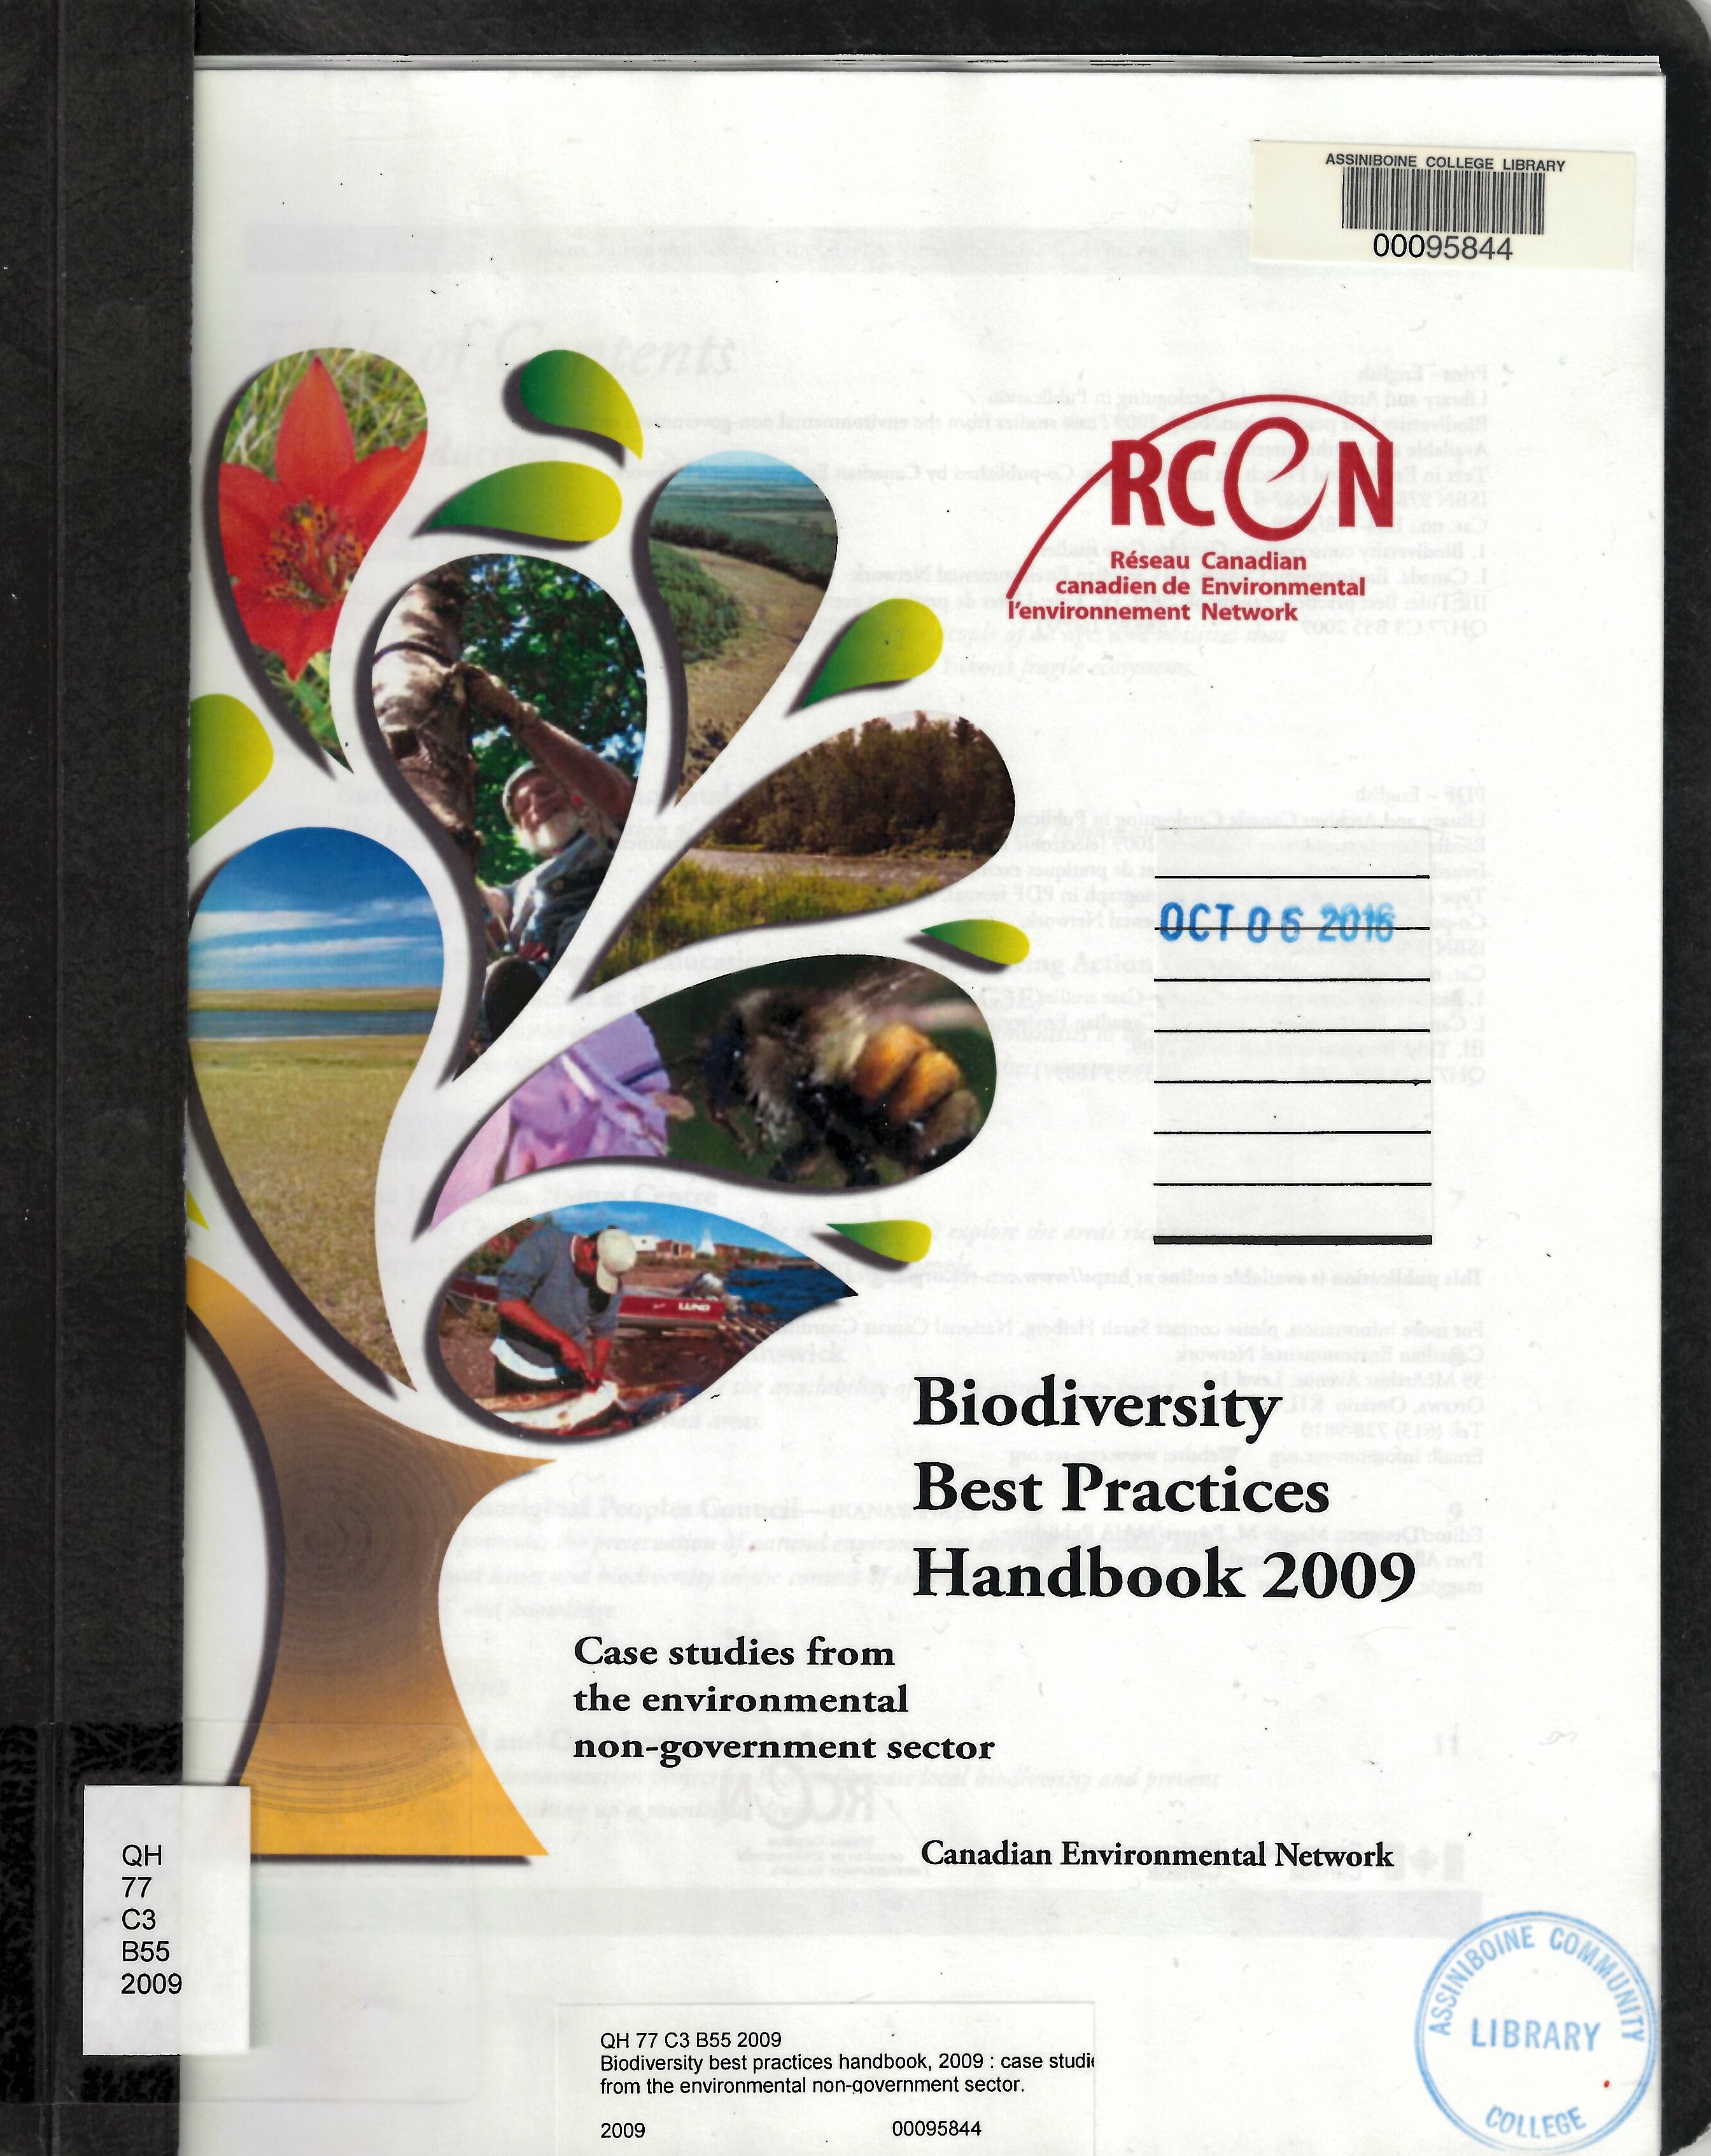 Biodiversity best practices handbook, 2009 : case studies from the environmental non-government sector